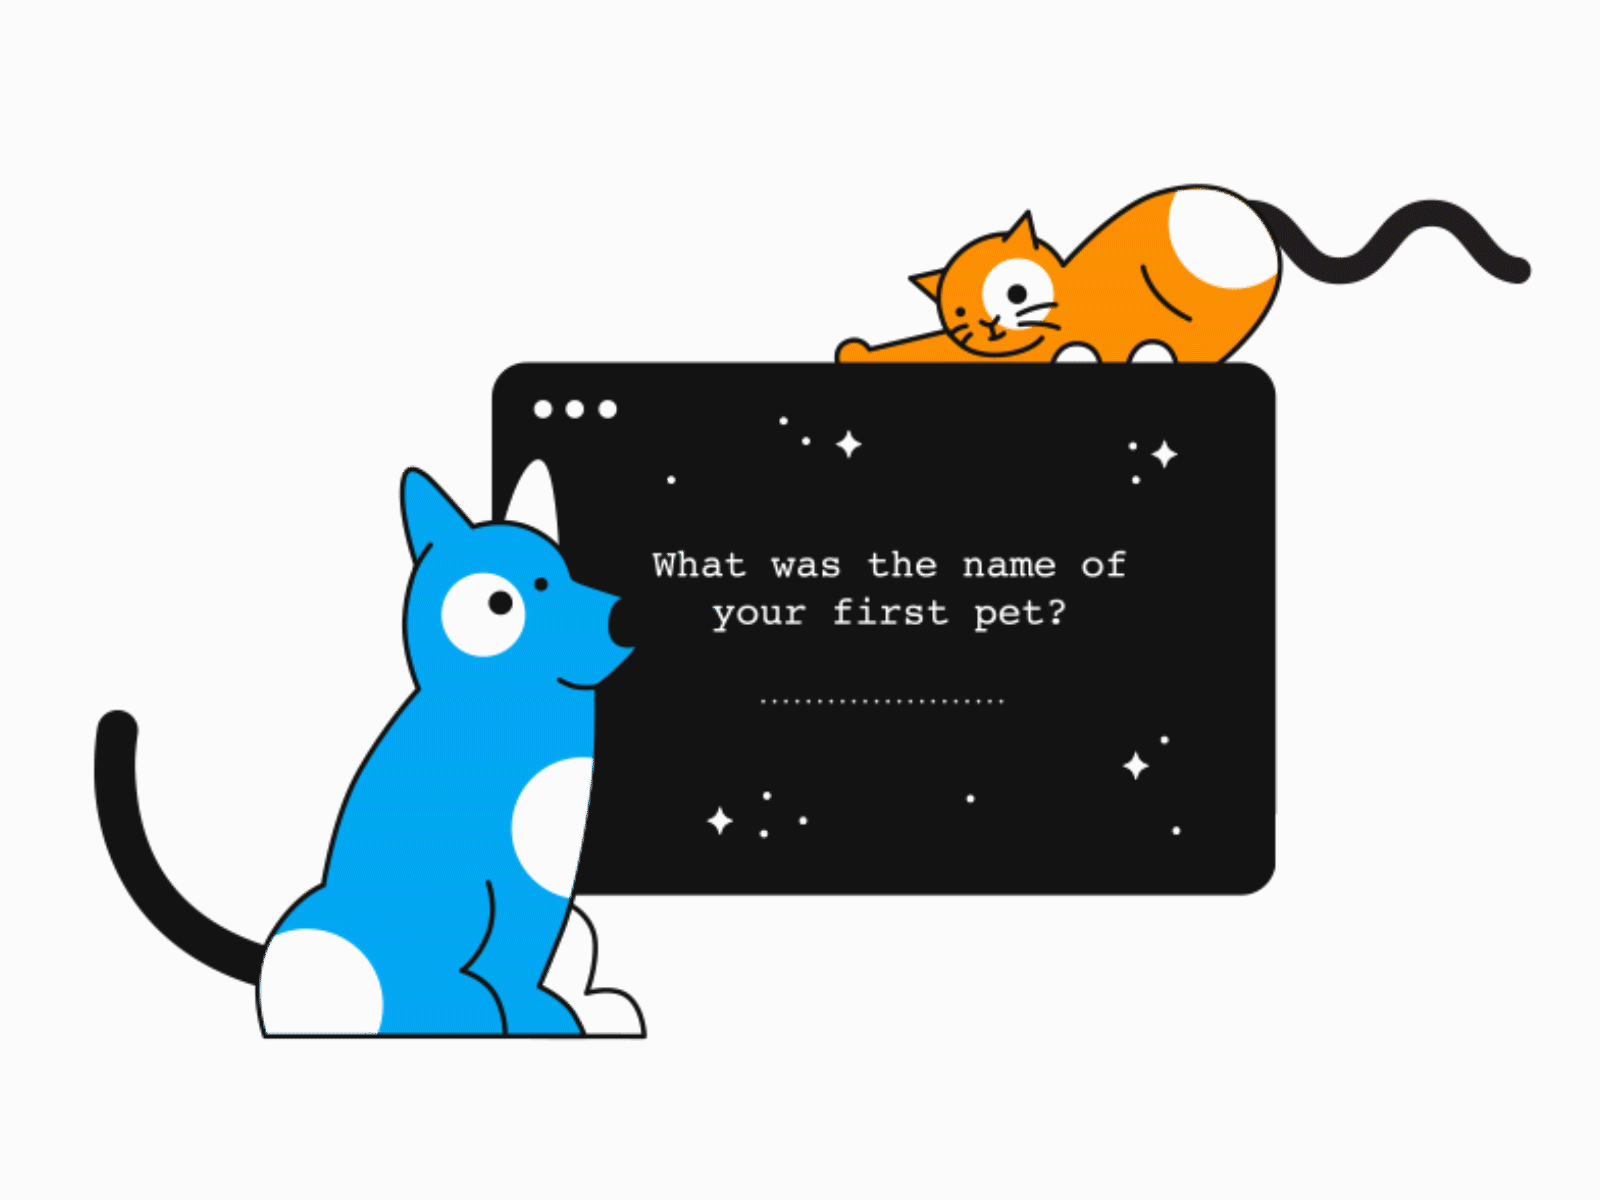 What was the name of your first pet? animation browser cat cute dog guideline illustration online security vector web